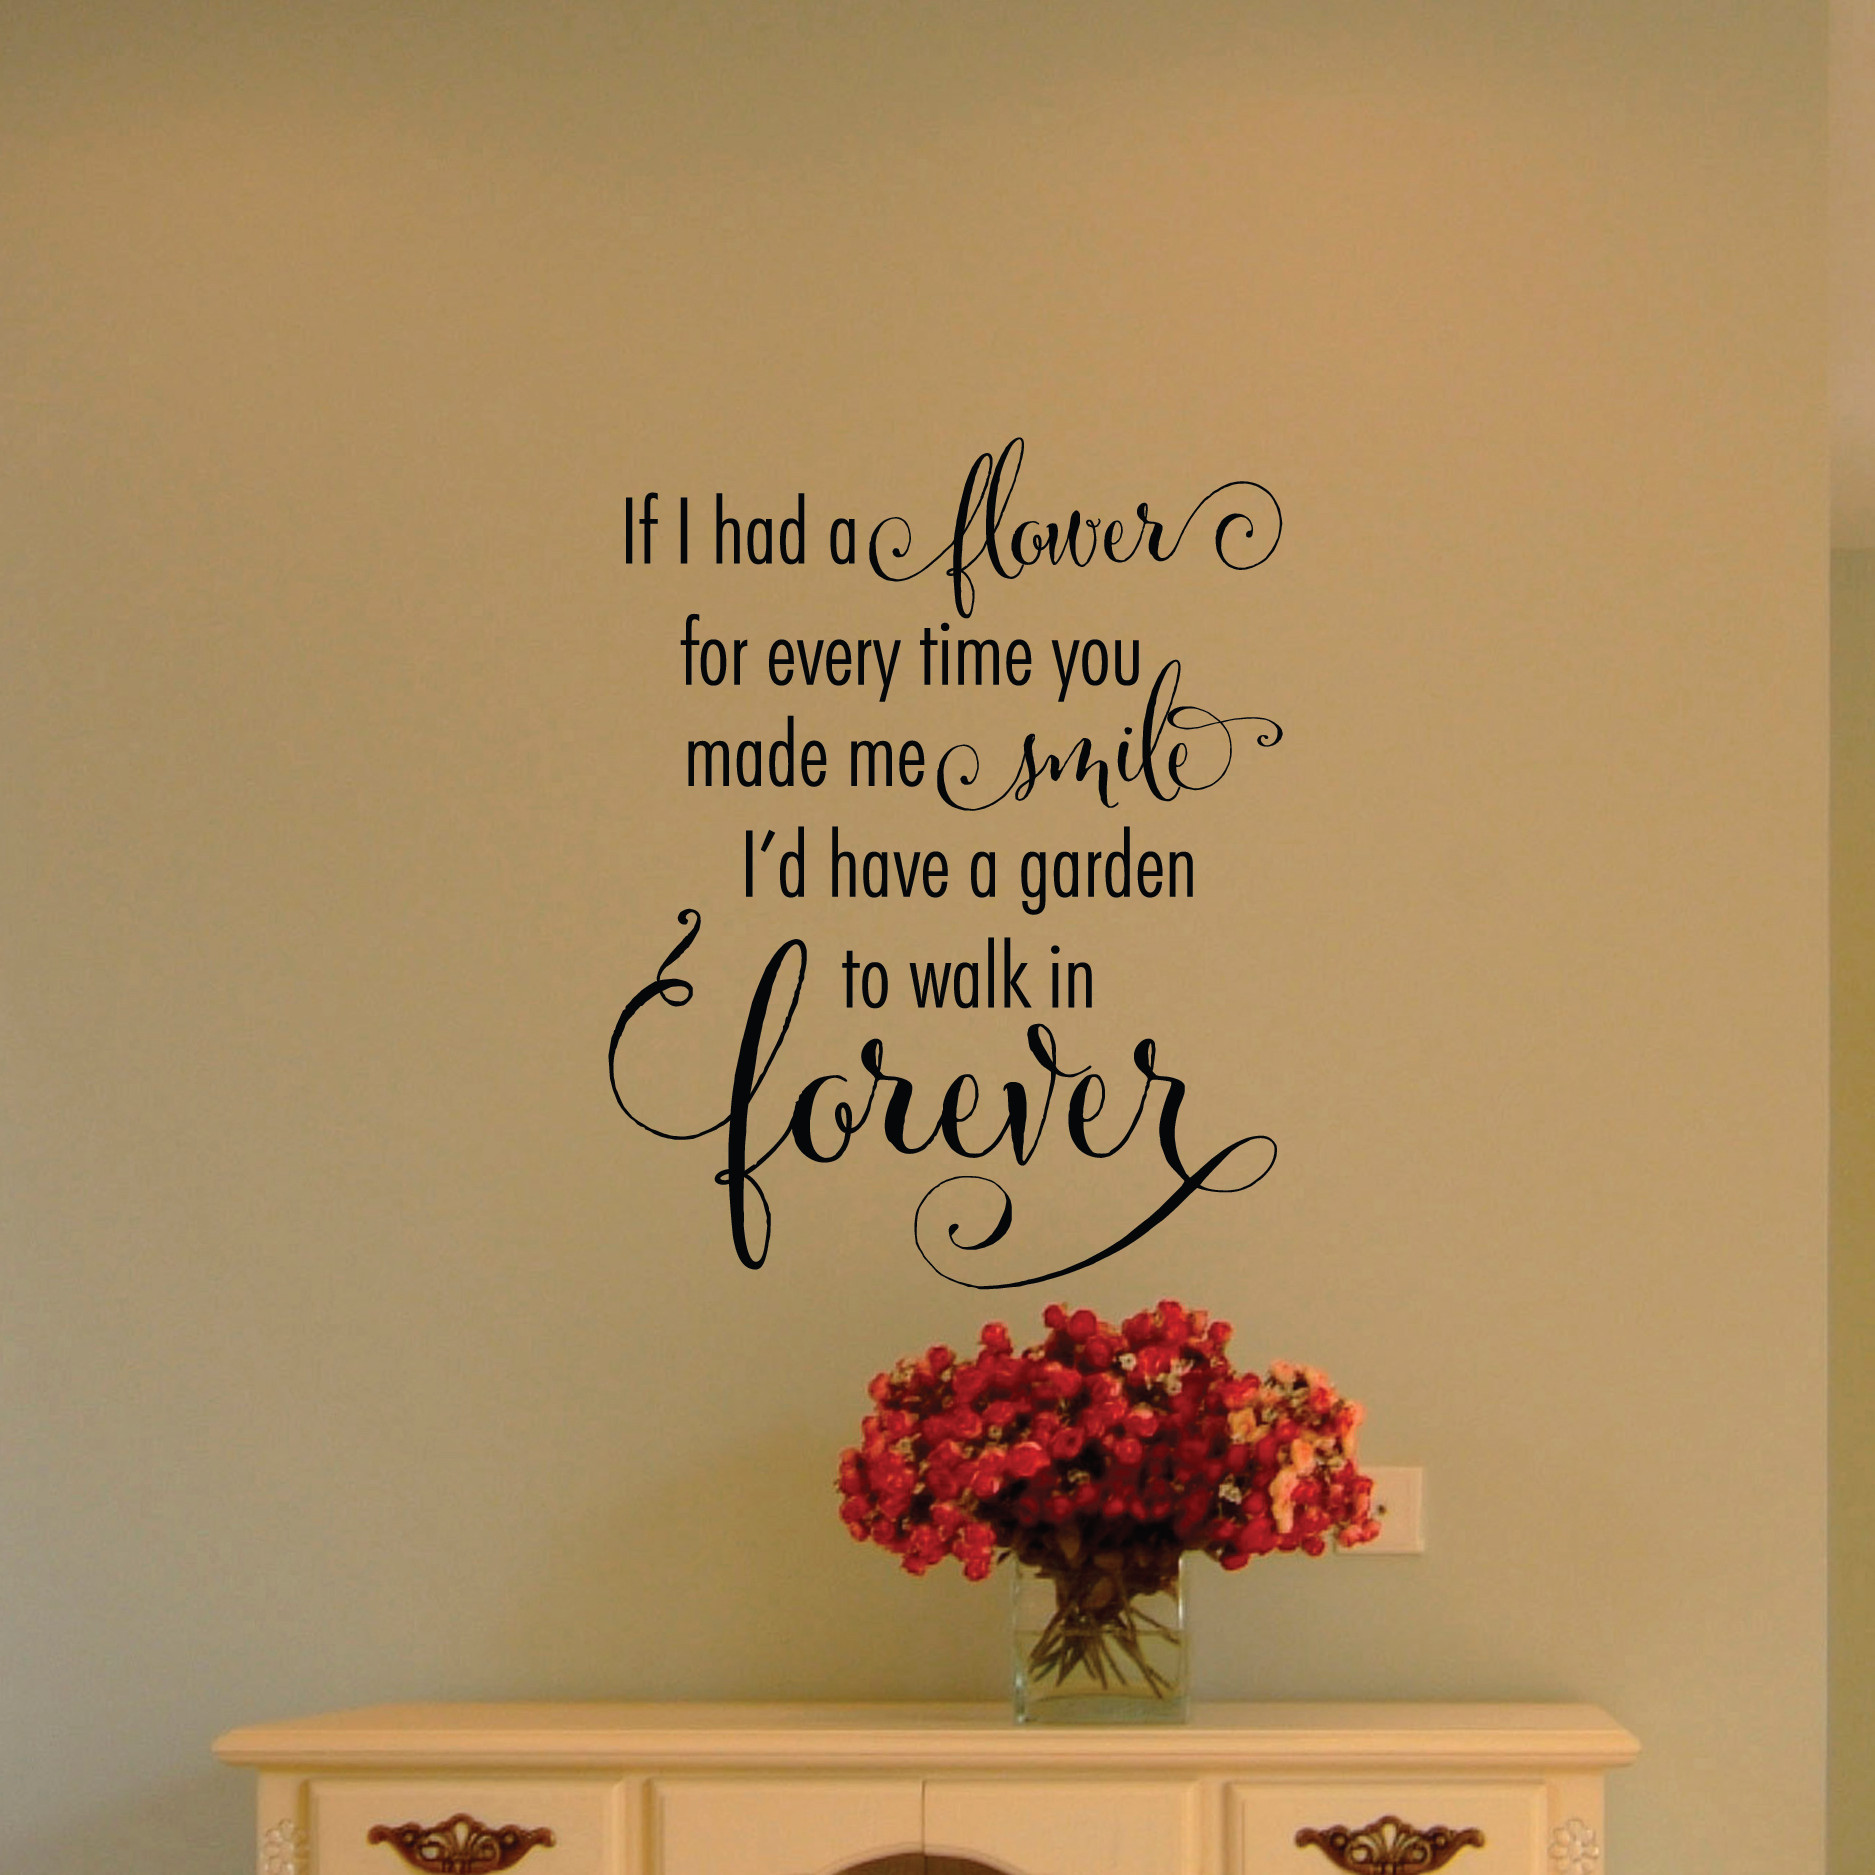 Quotes About Flowers And Love
 Garden To Walk In Forever Wall Quotes™ Decal